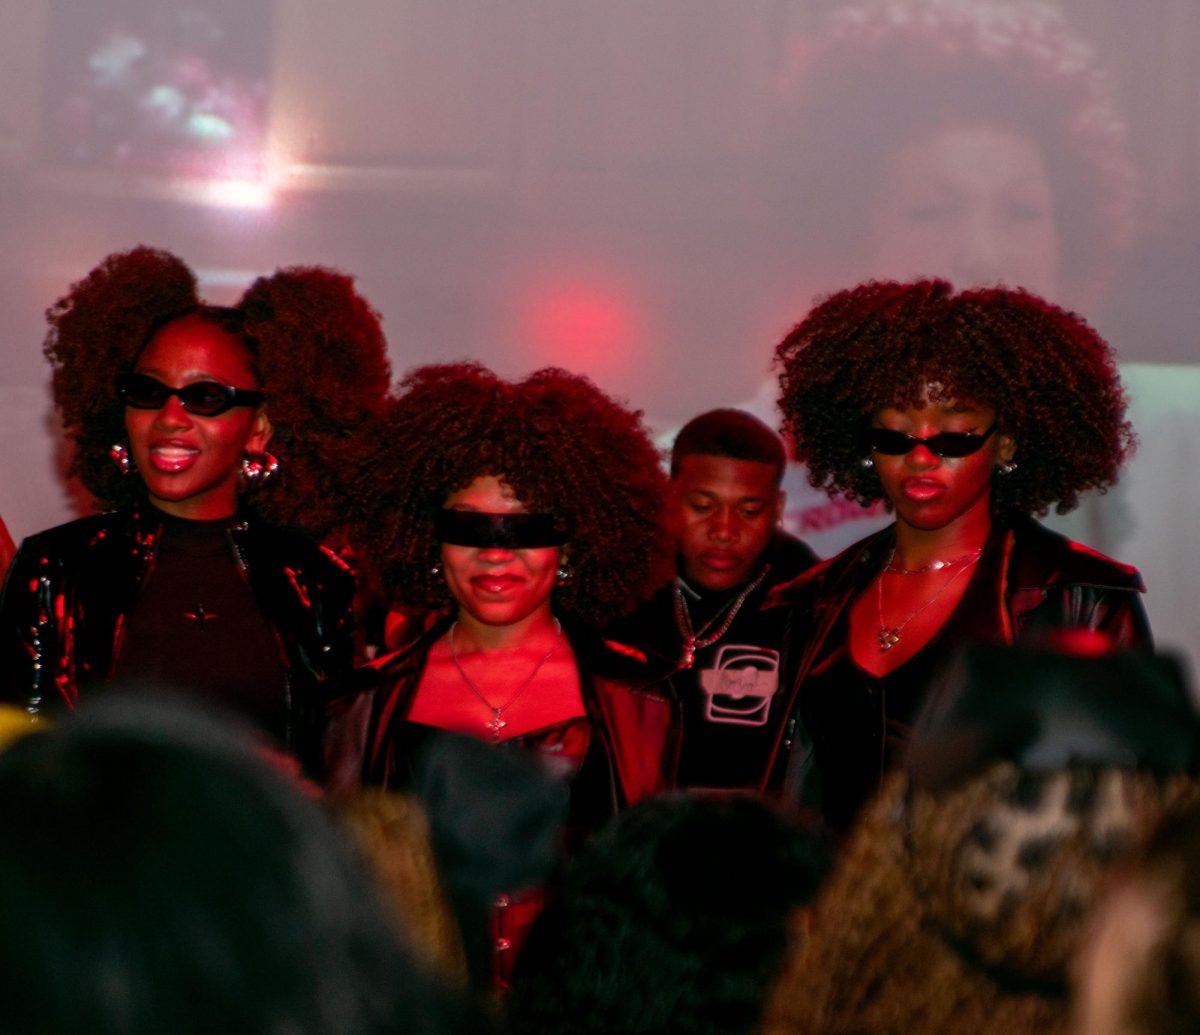 On Friday, Oct. 6, at the annual Black Student Union Blackout party, the winners of the best group costume pose for pictures while on stage.